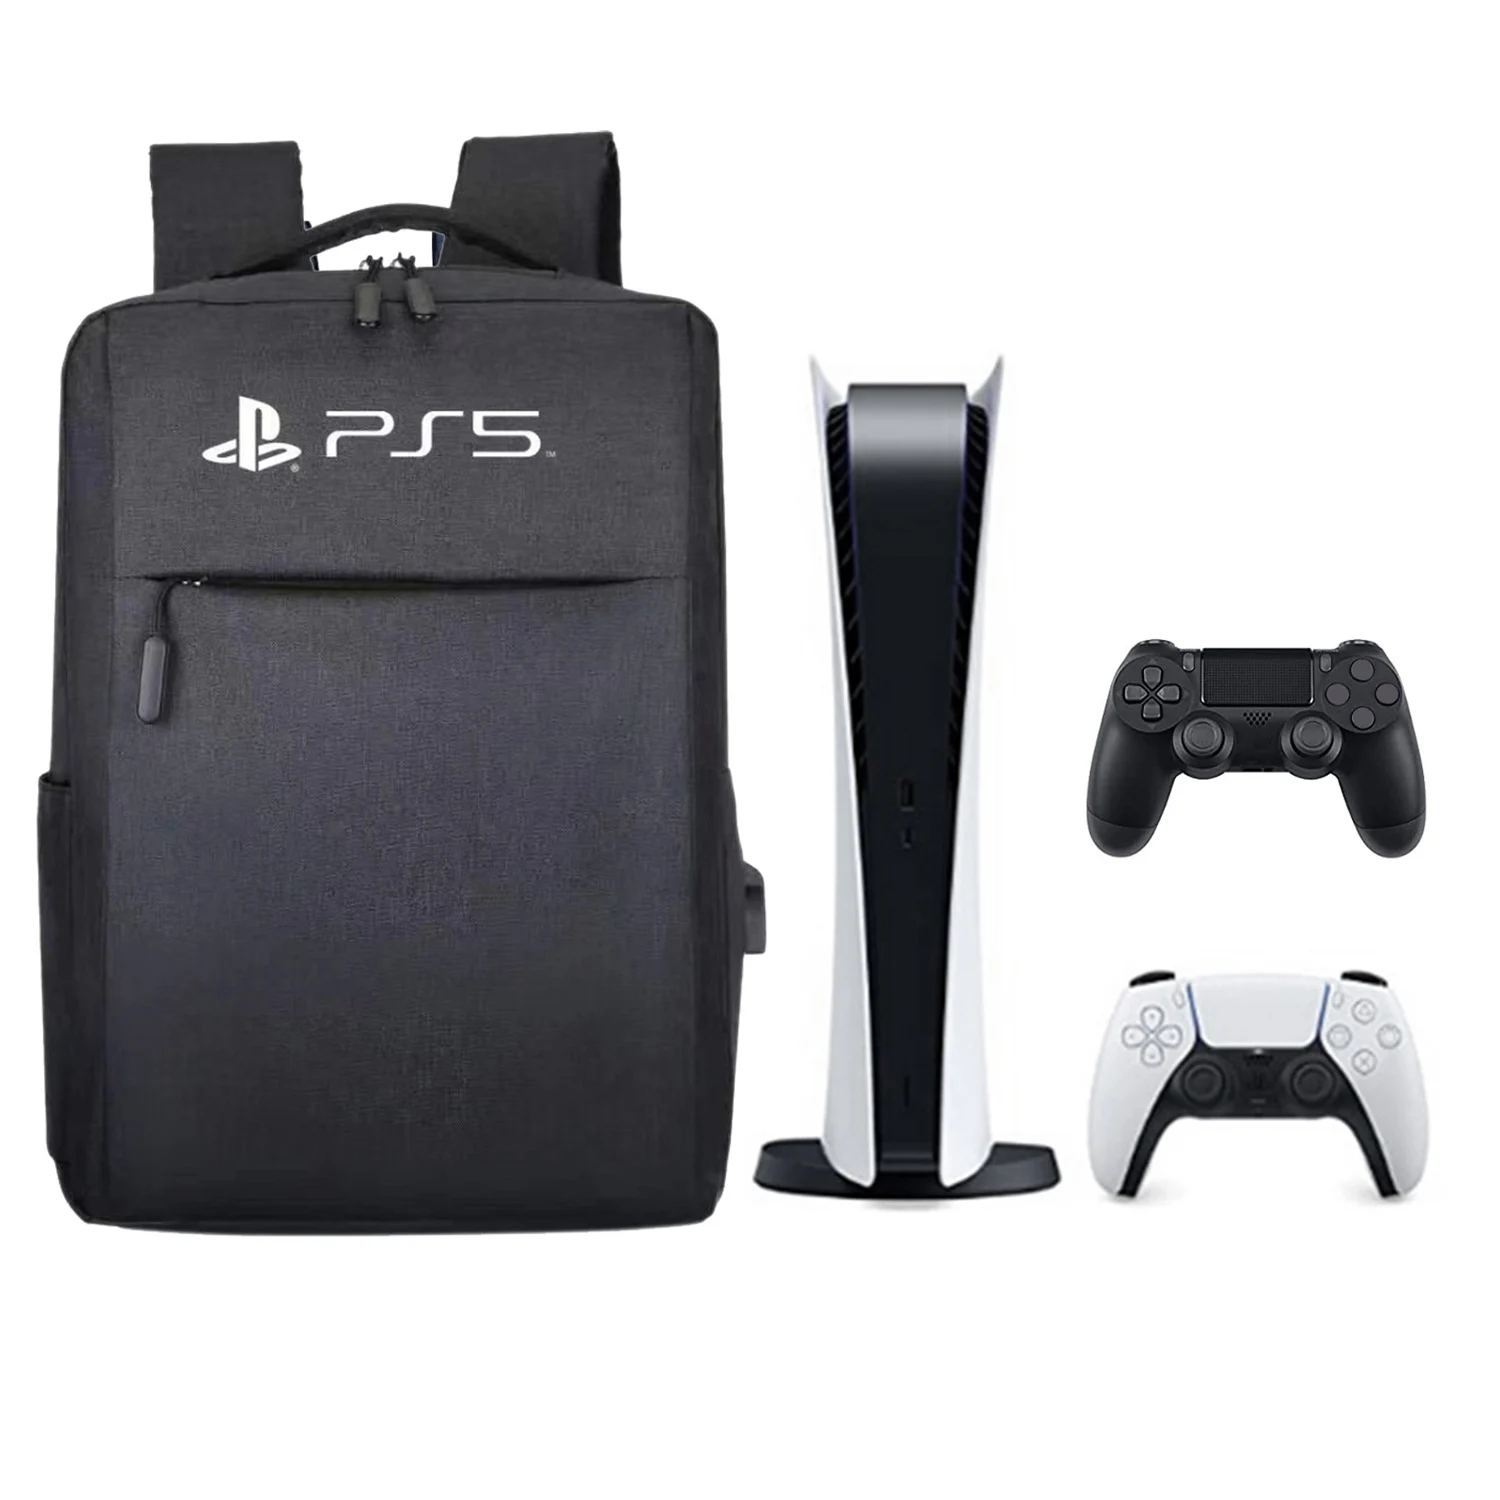 

Travel Carrying Case Portable Storage Bag Protective Shoulder Backpack for PlayStation 5 PS5 PS4 Console